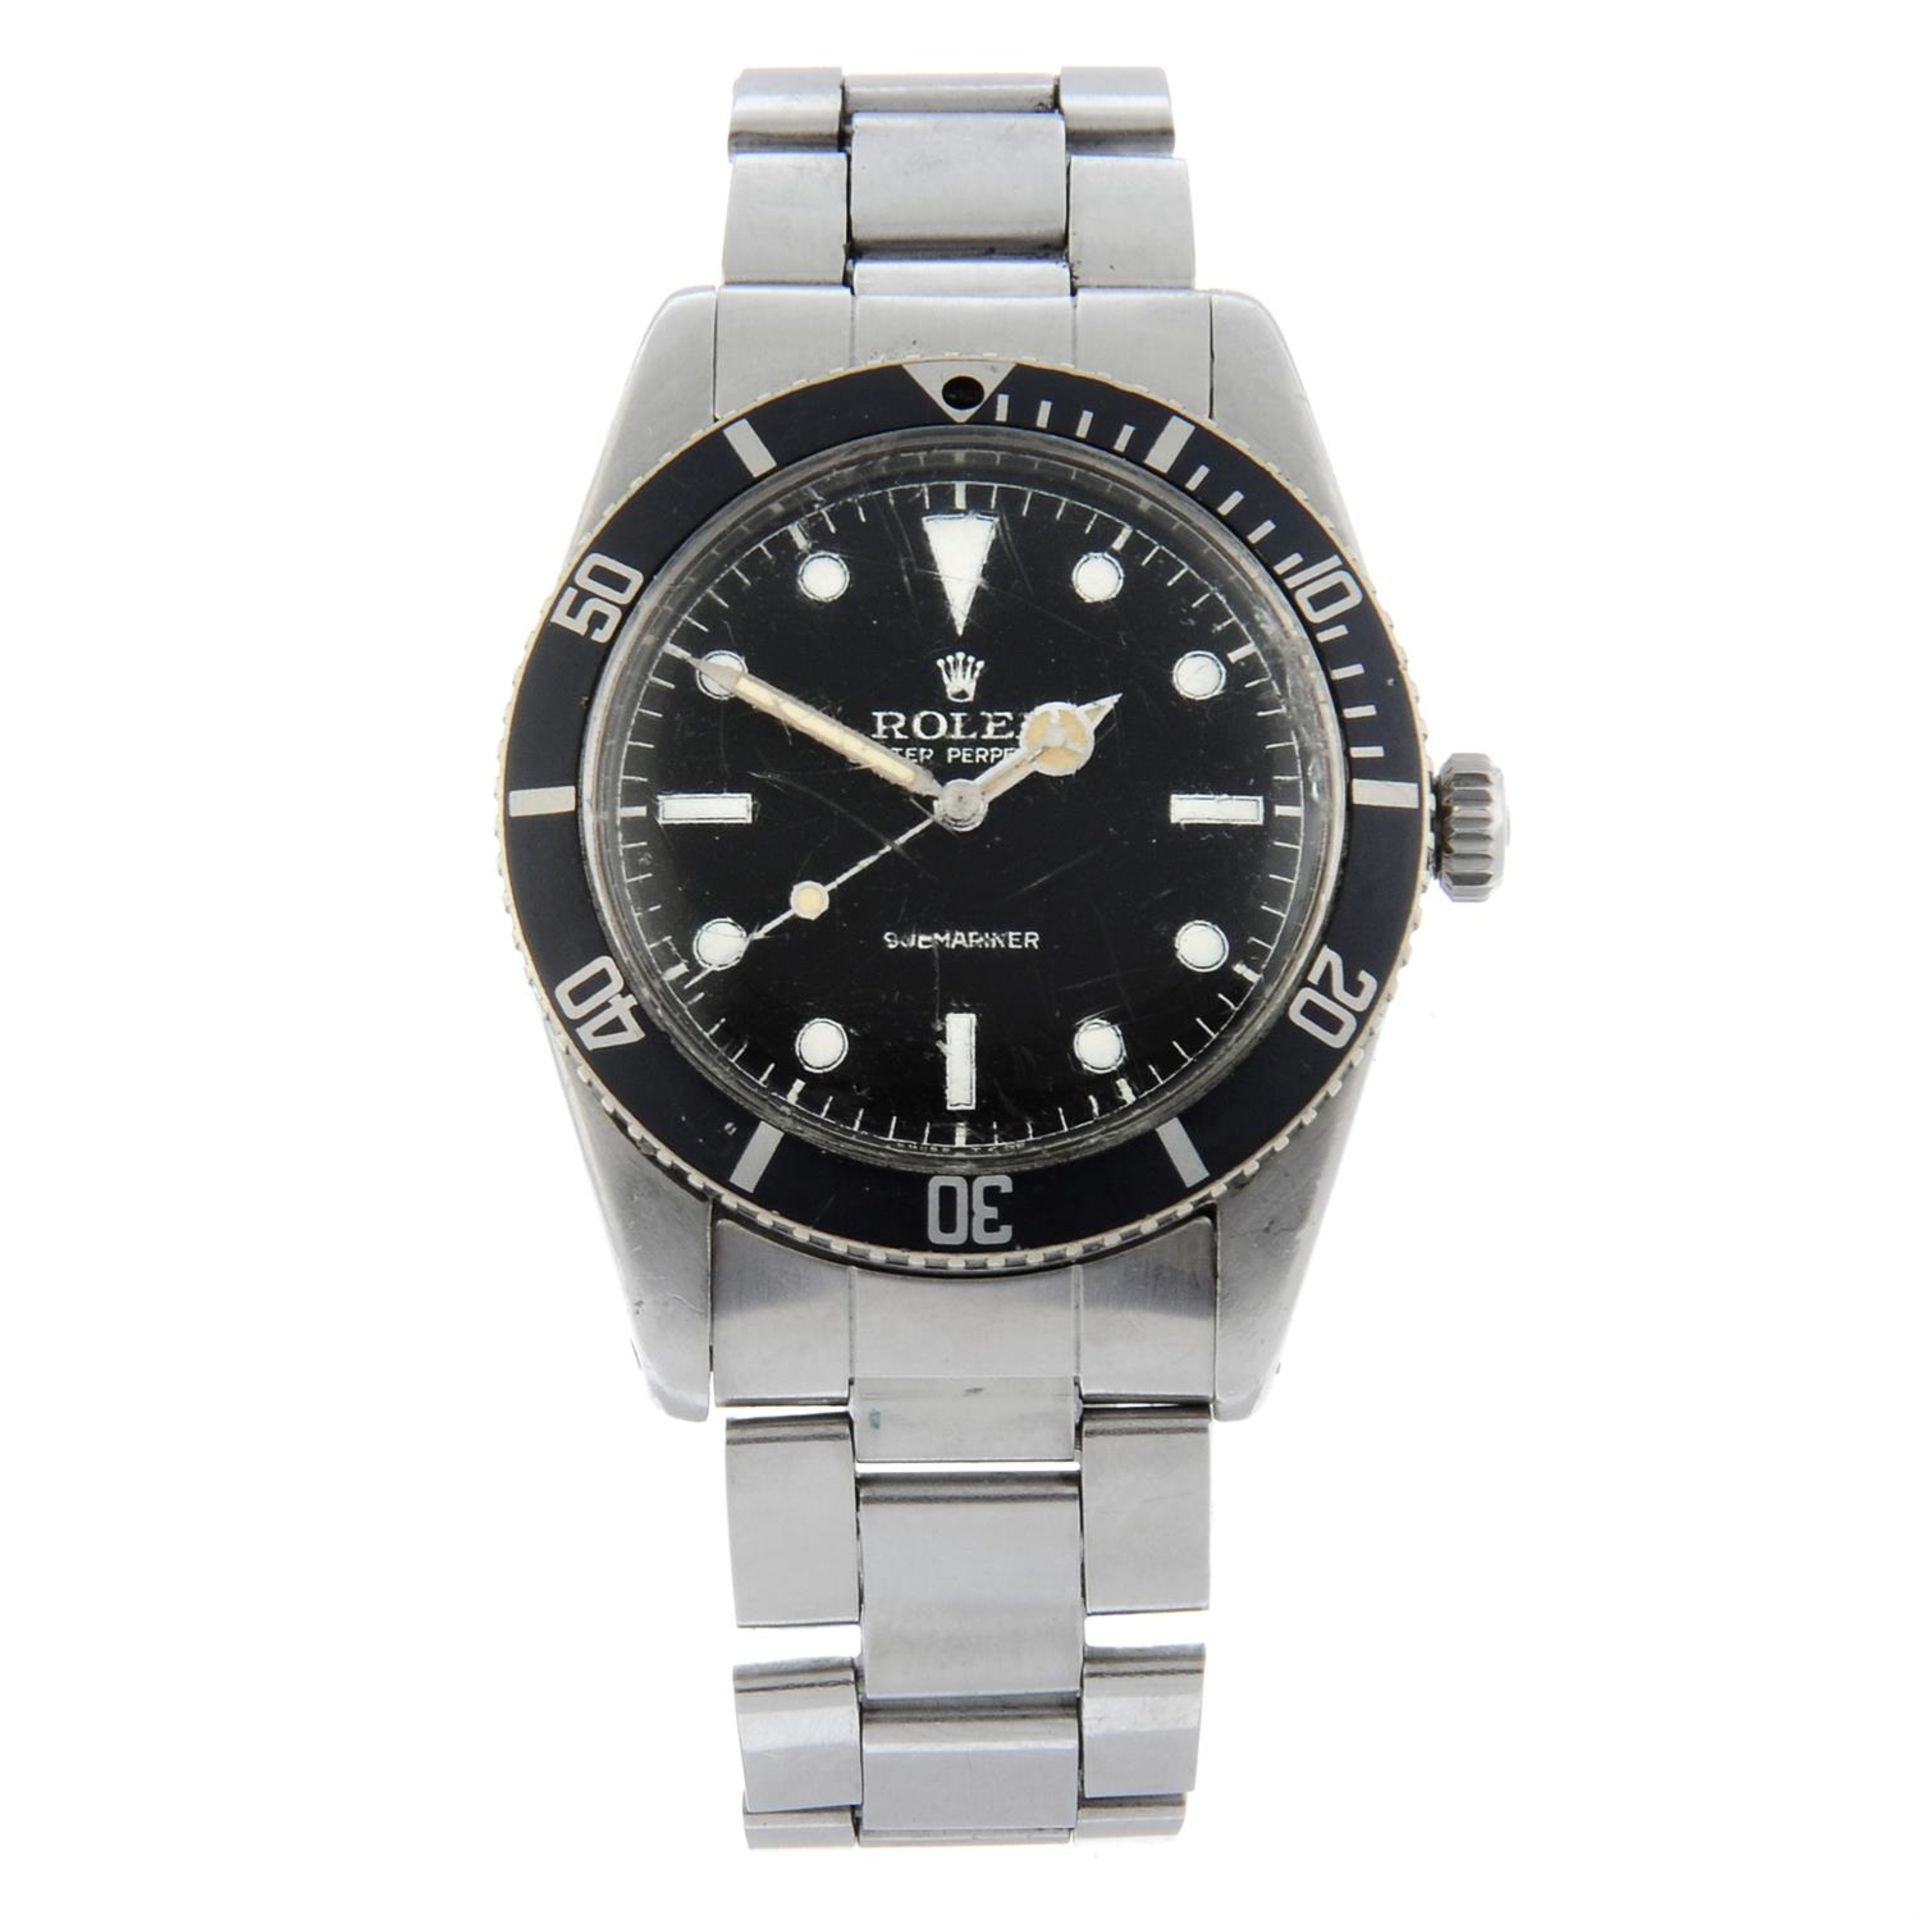 ROLEX - a stainless steel Oyster Perpetual Submariner bracelet watch, 37mm.